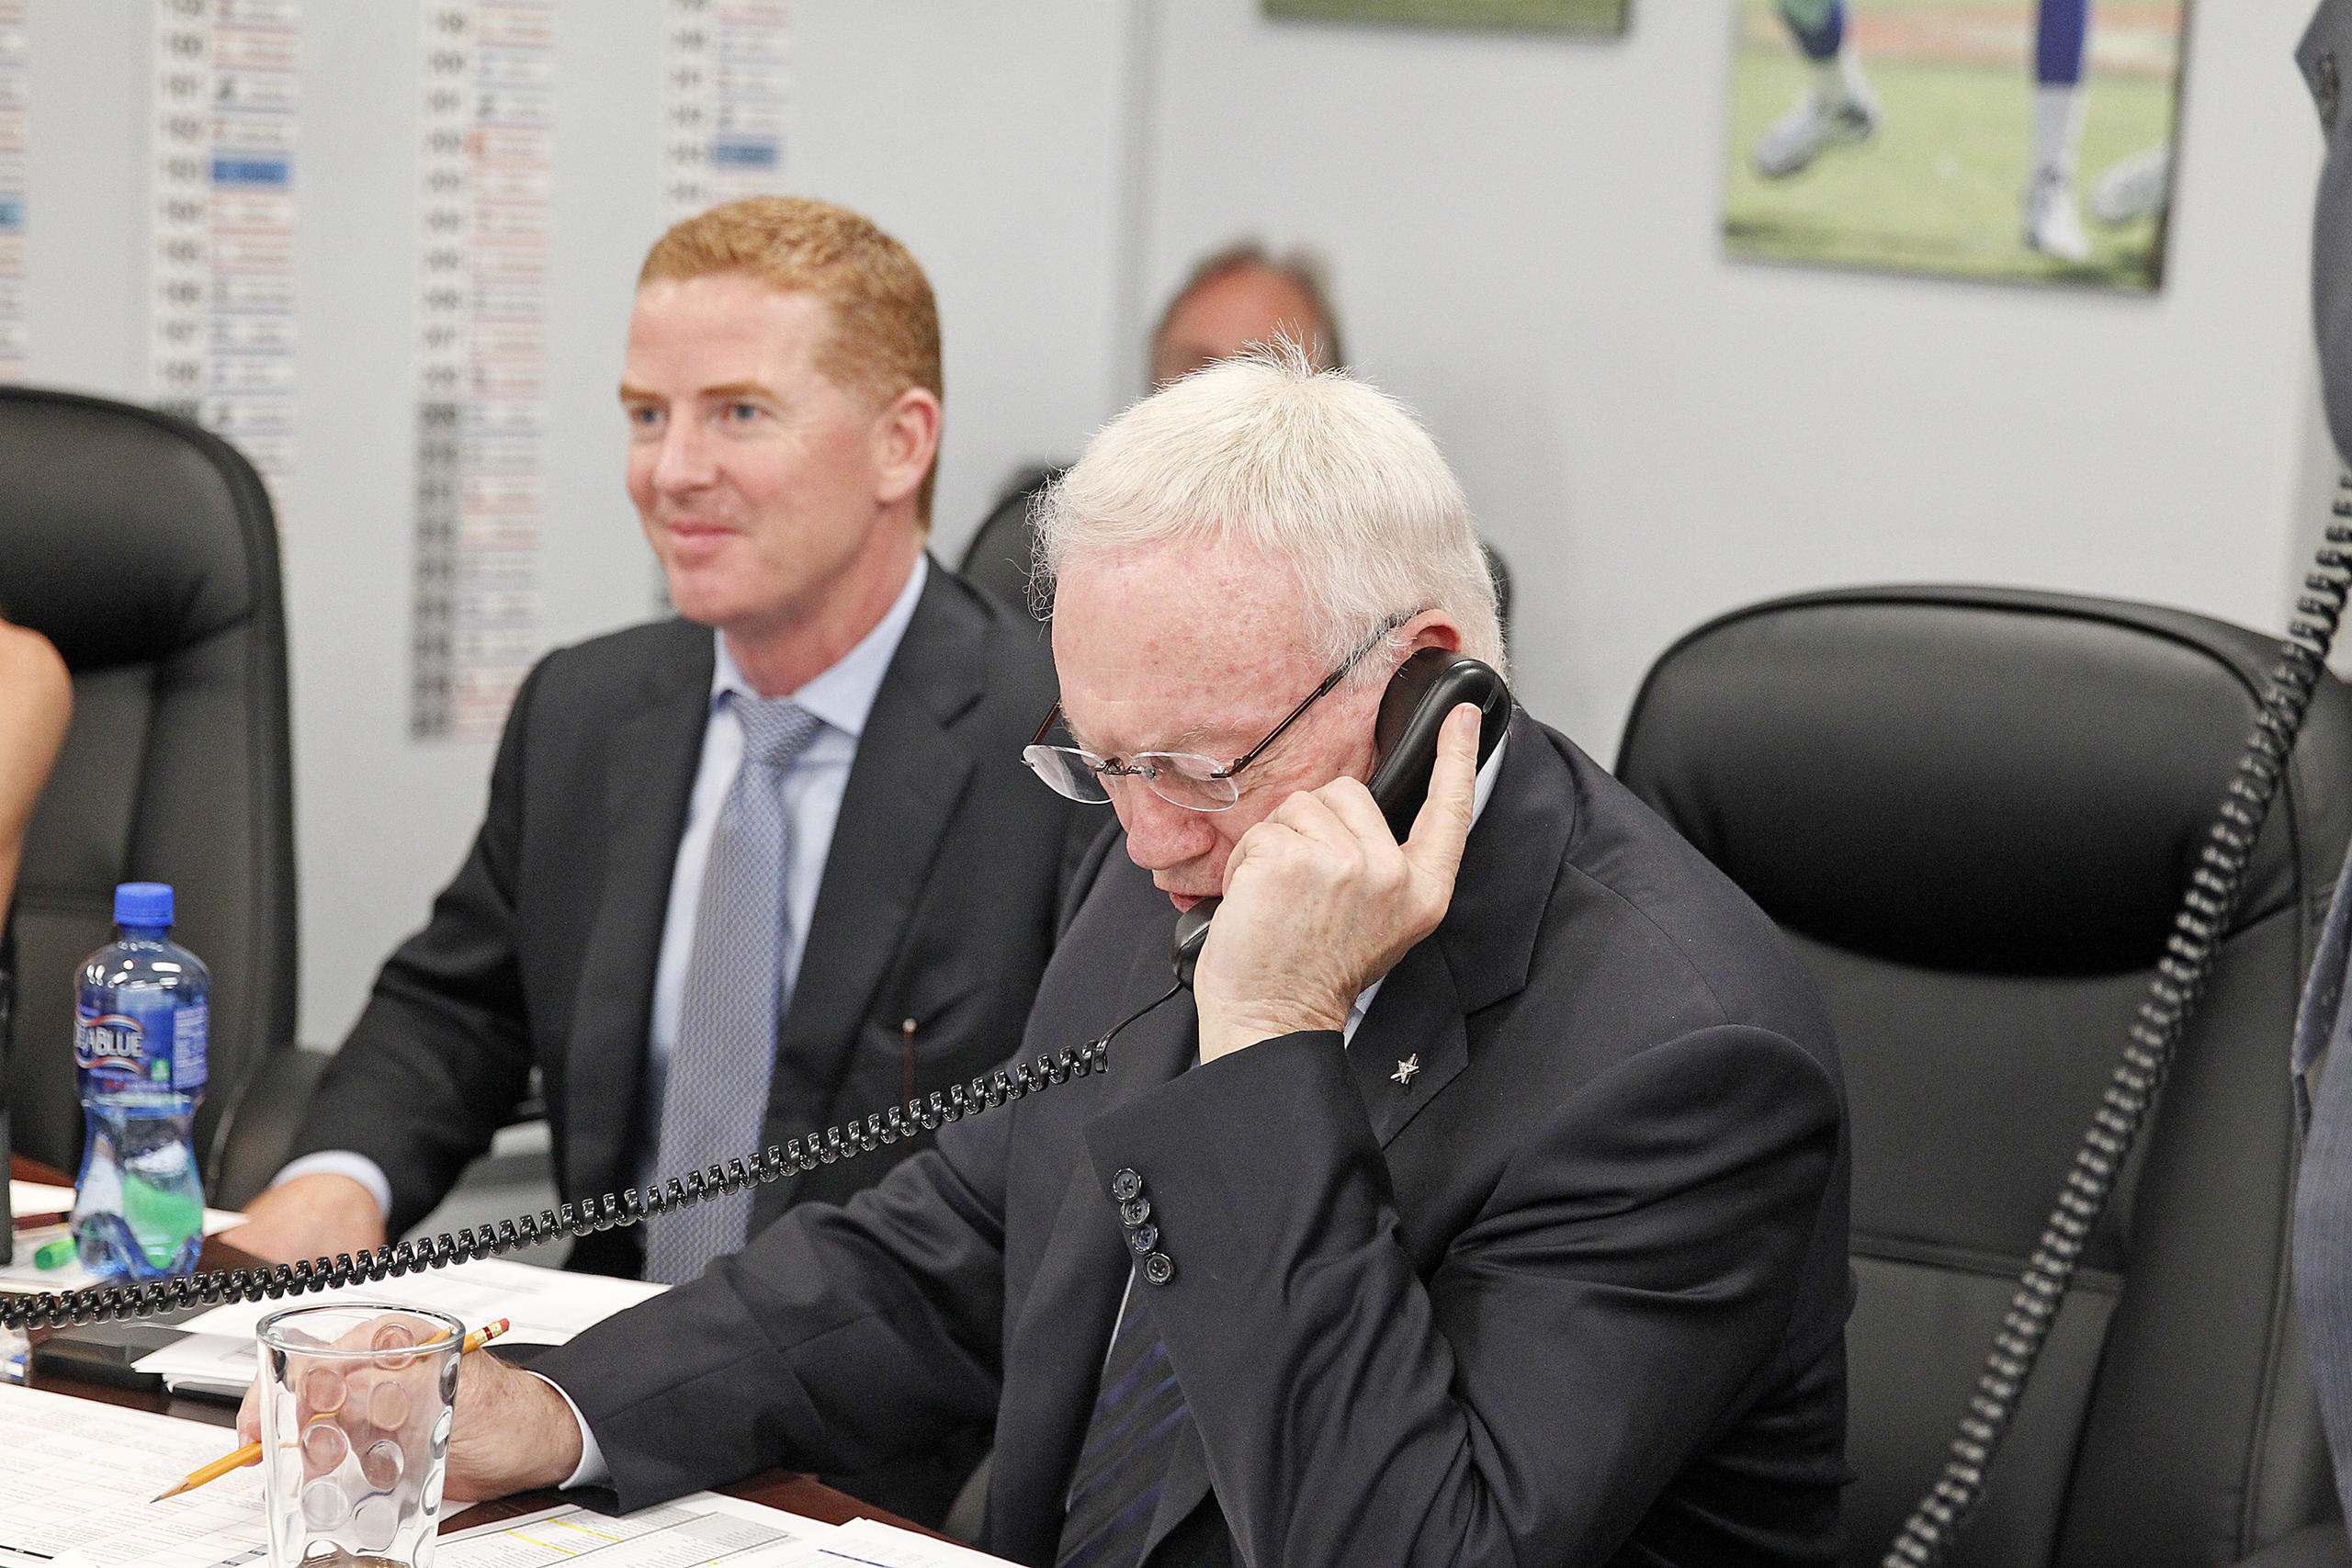 Cowboys Draft: Could This Rising QB Help the Cowboys Trade Out of the First Round? 1